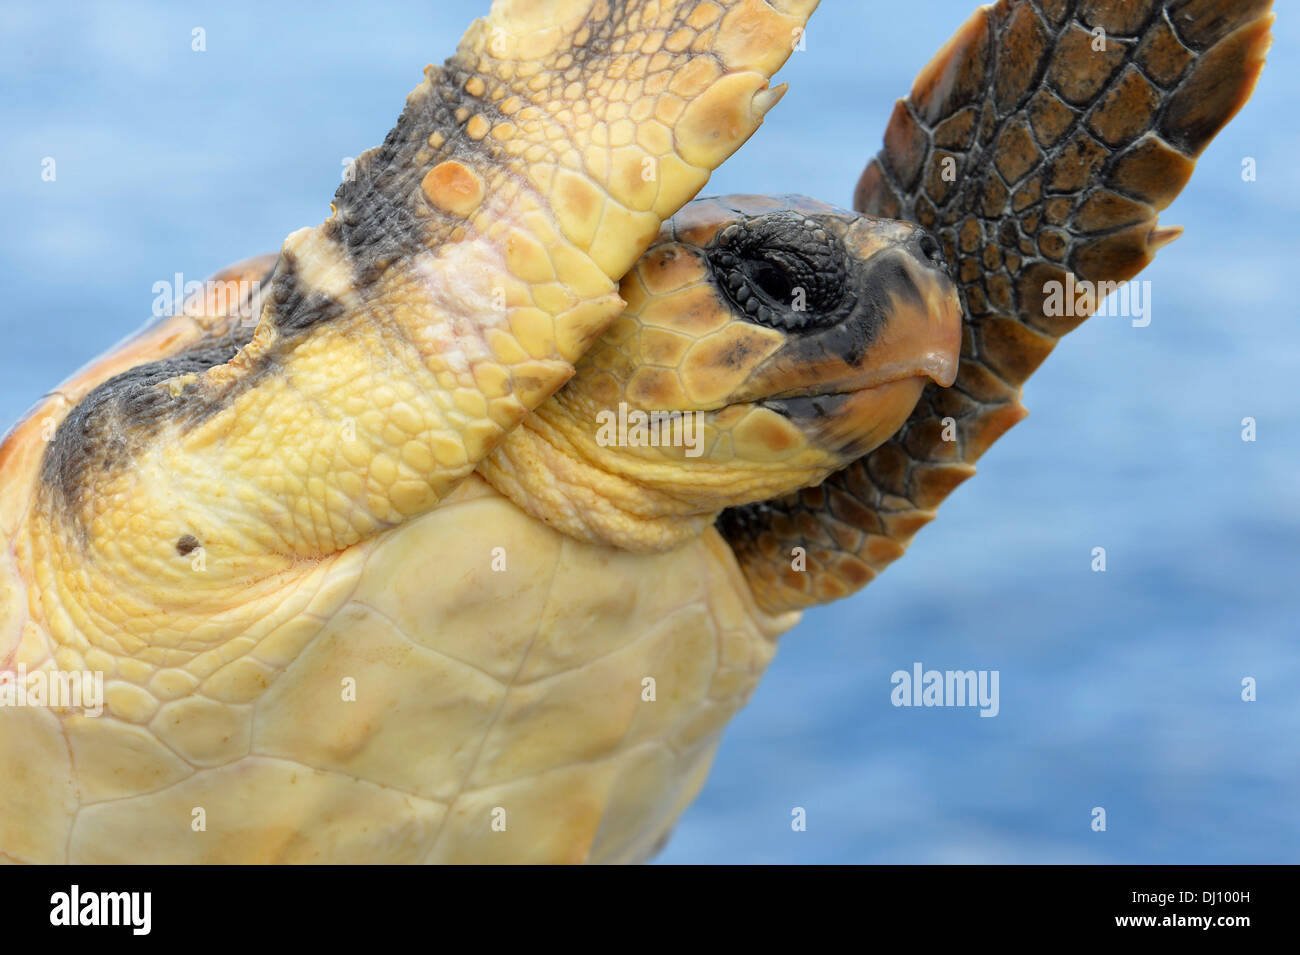 Loggerhead Sea Turtle (Caretta caretta) out of water showing head and flippers, The Azores, June Stock Photo